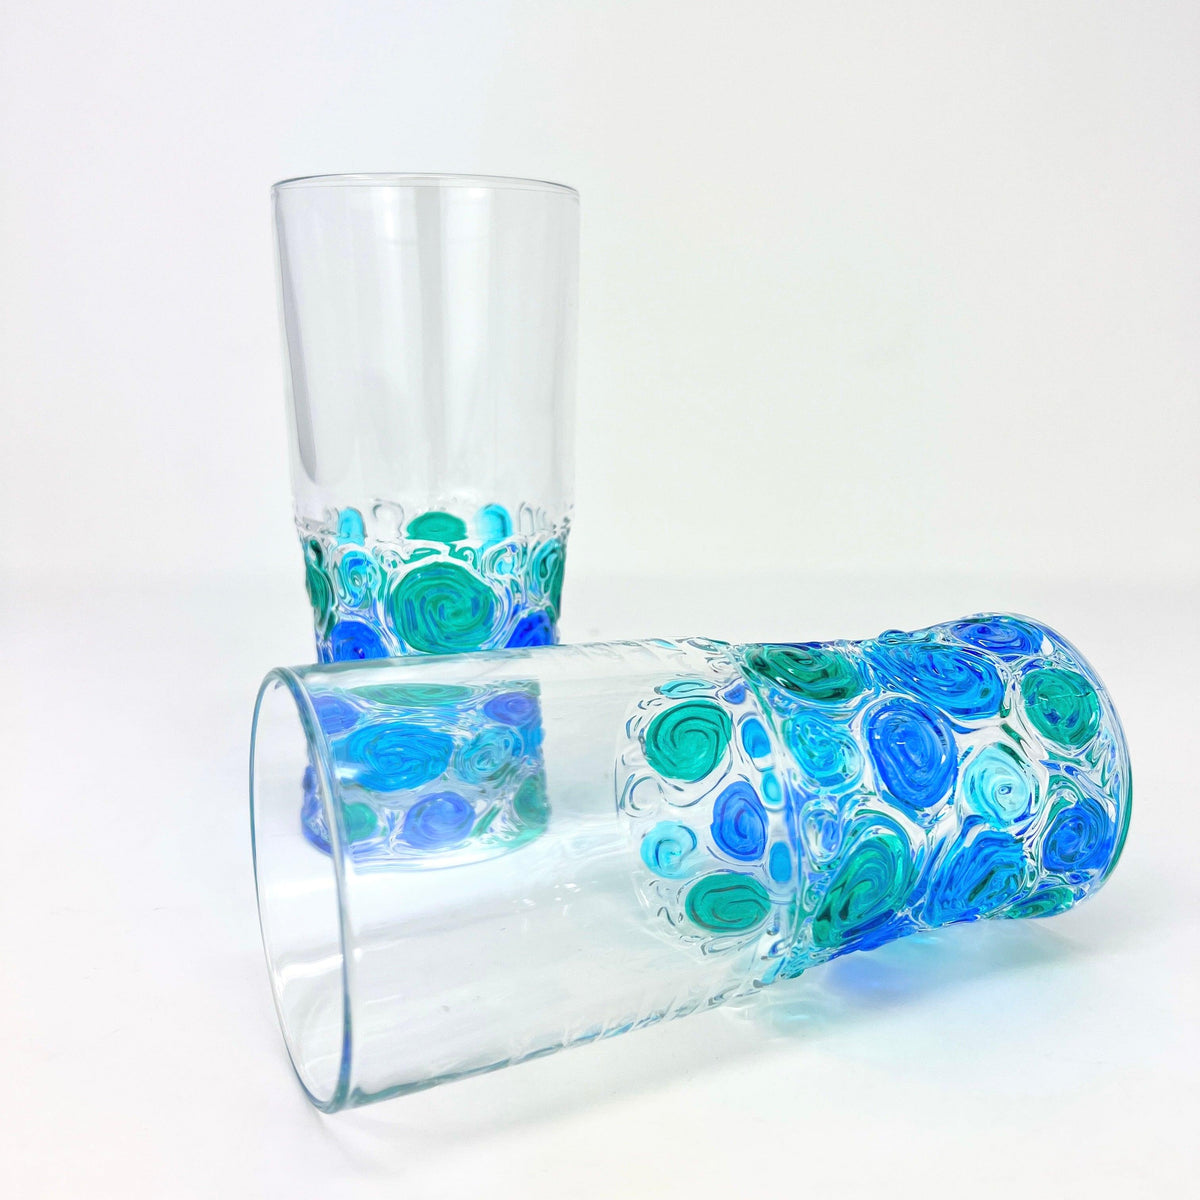 Two Italian Crystal tall drinking glasses with bright blue, green, and turquoise swirls of color on the bottom half. One glass lays on it&#39;s side, the other stands upright.